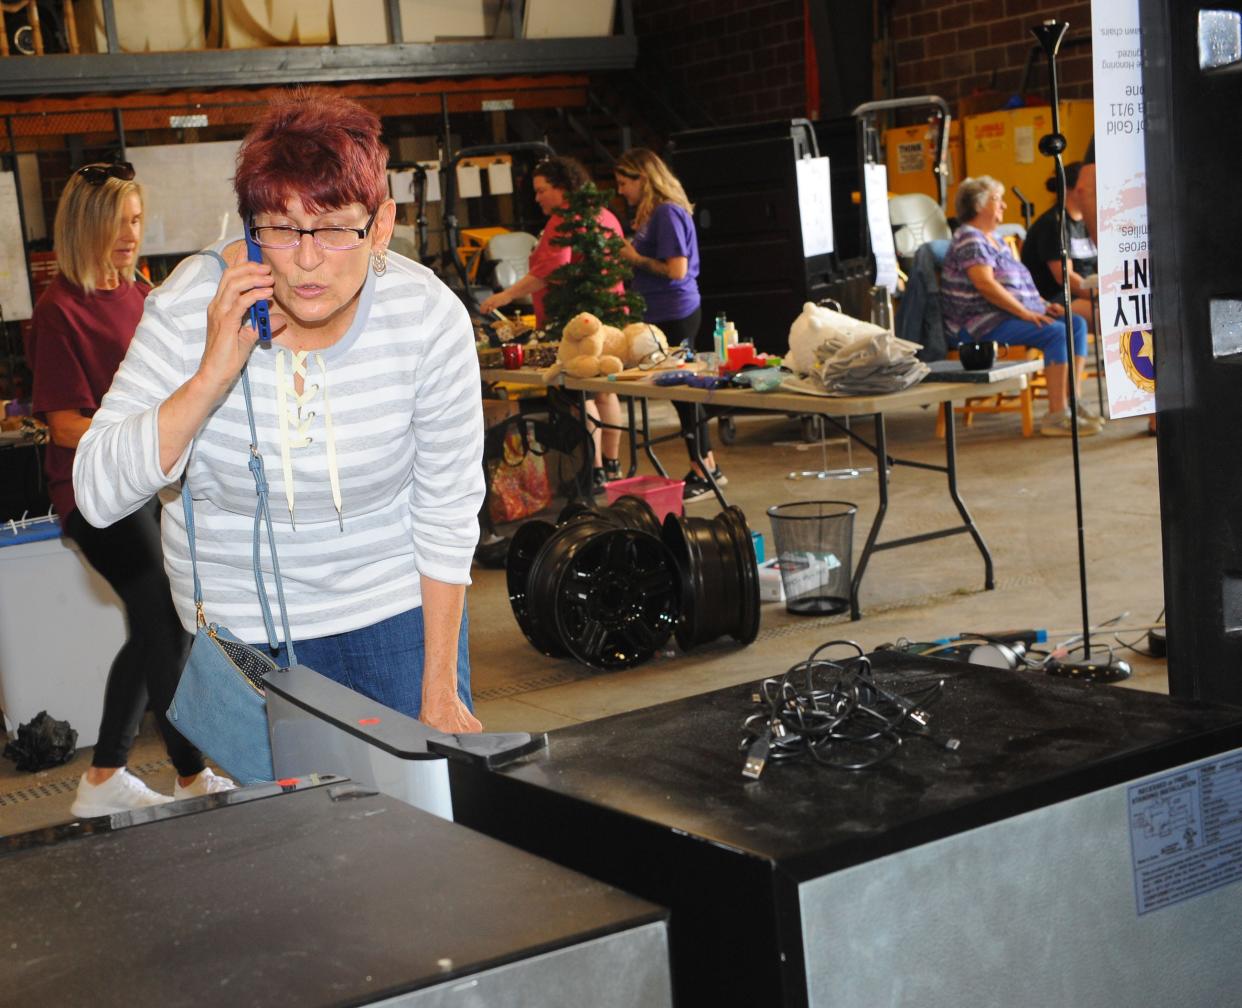 Susan Meece calls a friend as she decides whether to purchase a small refrigerator Thursday, May 19, 2022, during the annual "Trash to Treasure" sale at University of Mount Union Physical Plant. A variety of items were available for purchase, and proceeds will benefit community projects in Alliance.